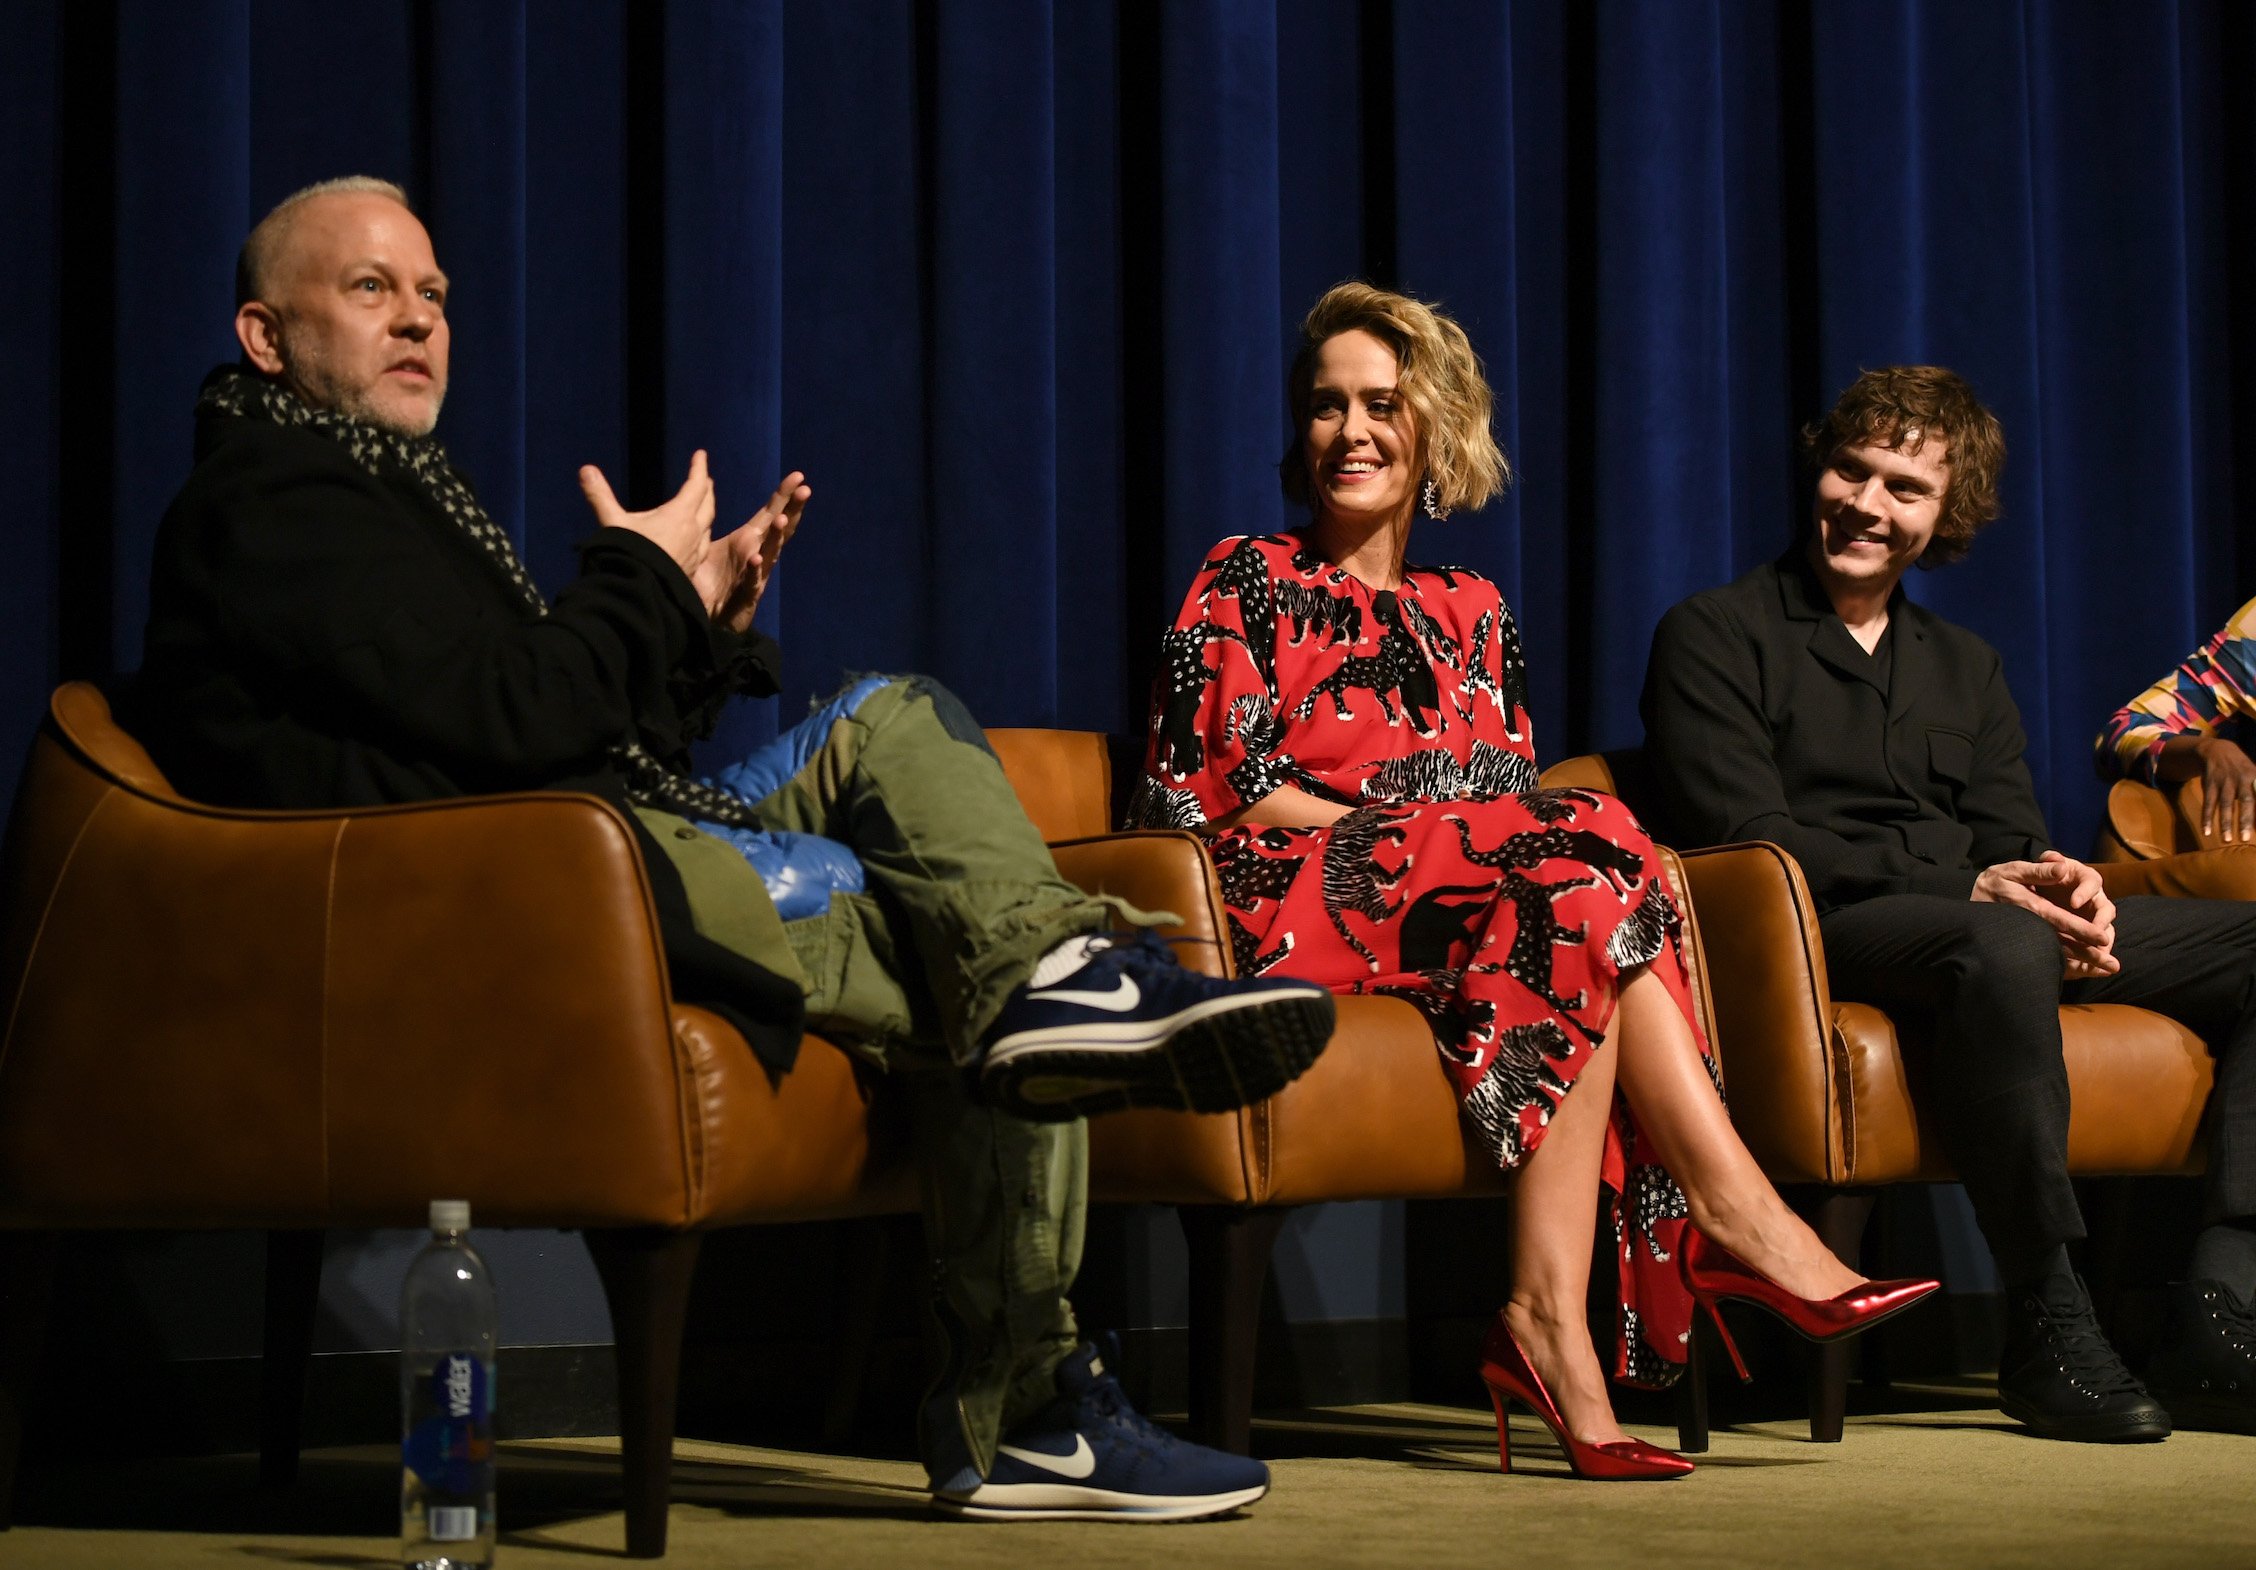 Ryan Murphy, Sarah Paulson, and Evan Peters from 'American Horror Story' Season 10 talking about the show on stage